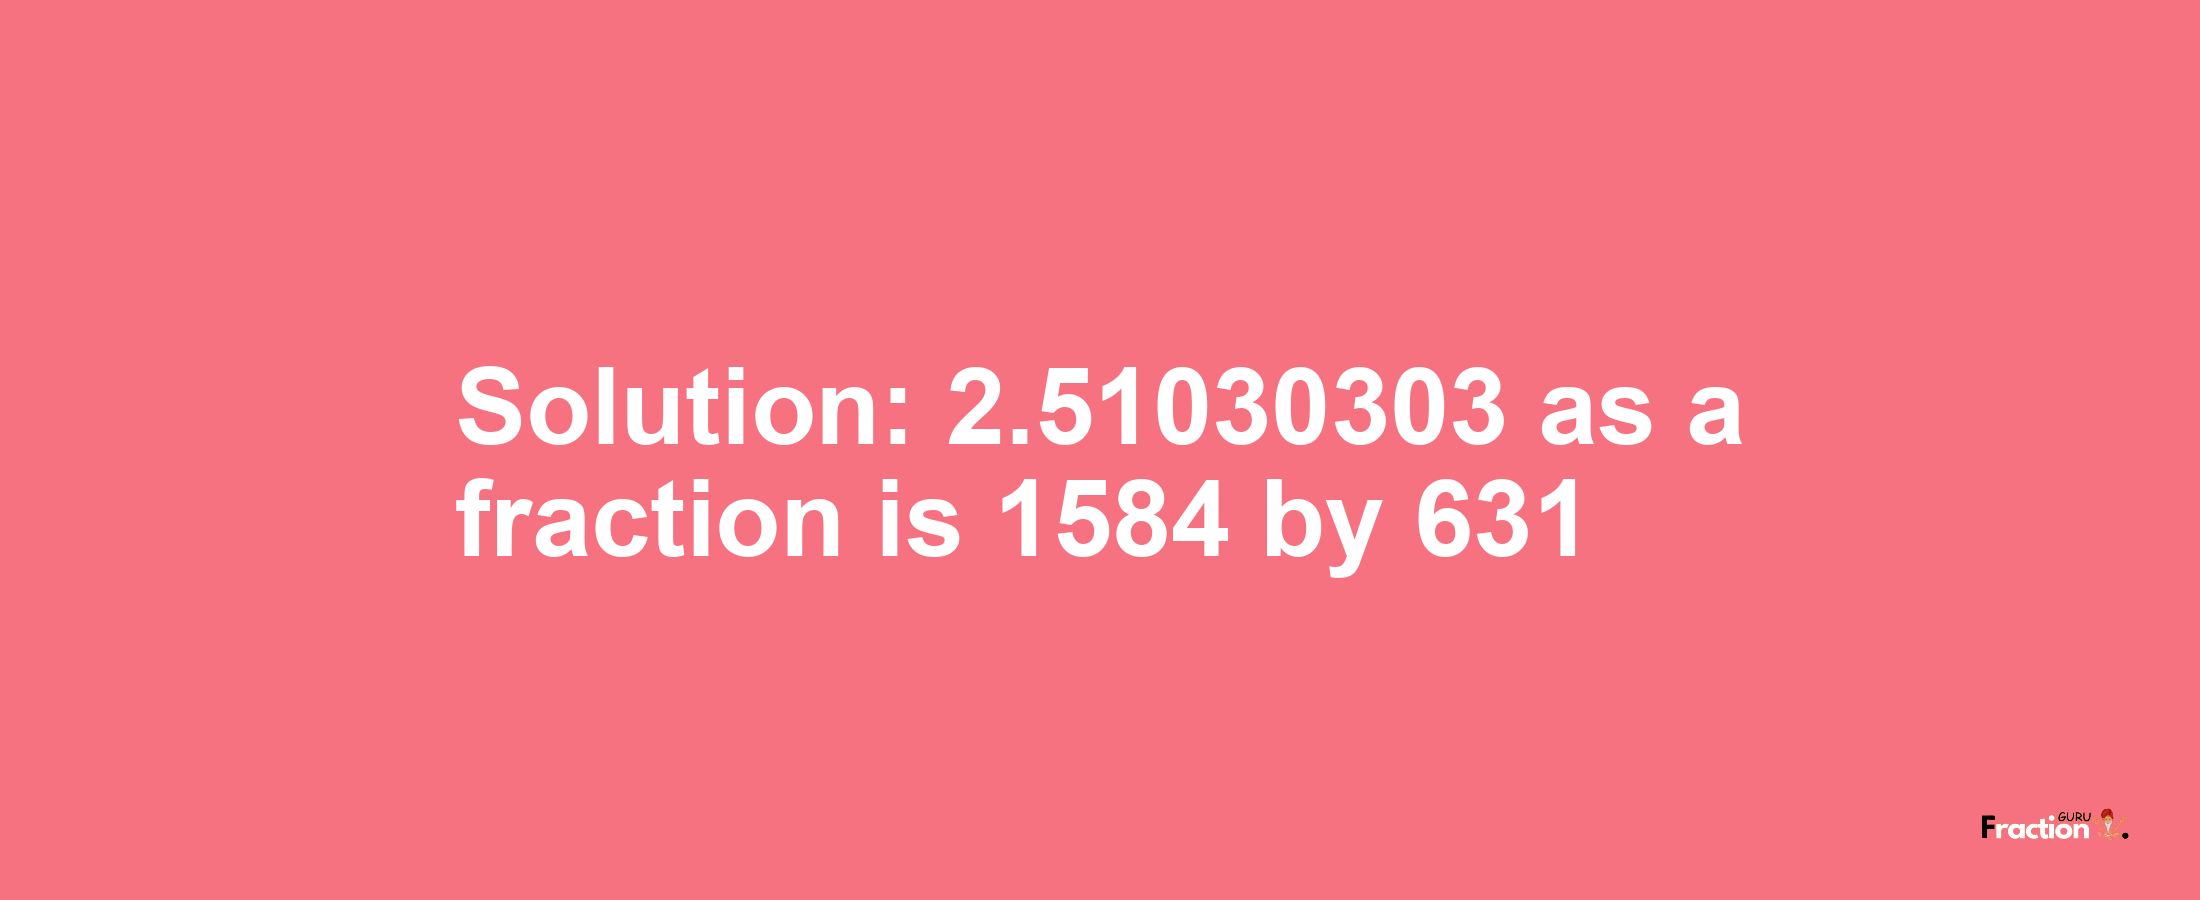 Solution:2.51030303 as a fraction is 1584/631